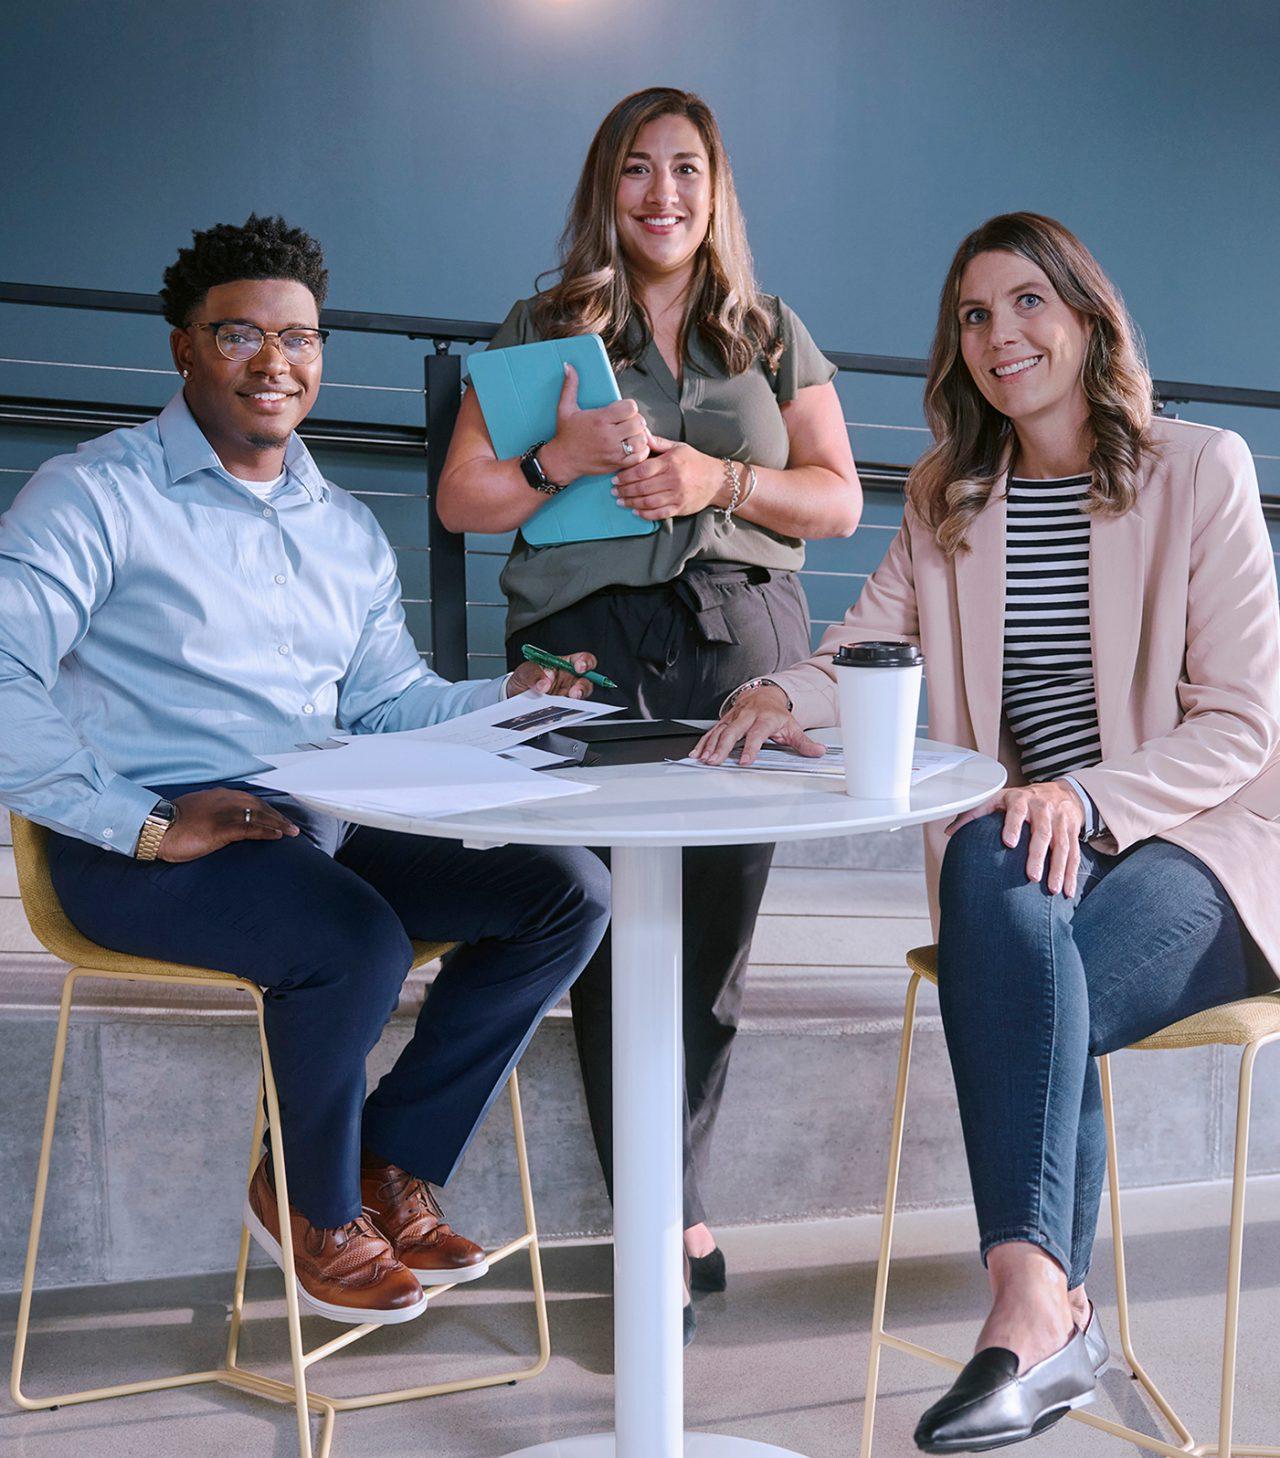 Two female employees and one male employee smiling and gathered around a tall white table.